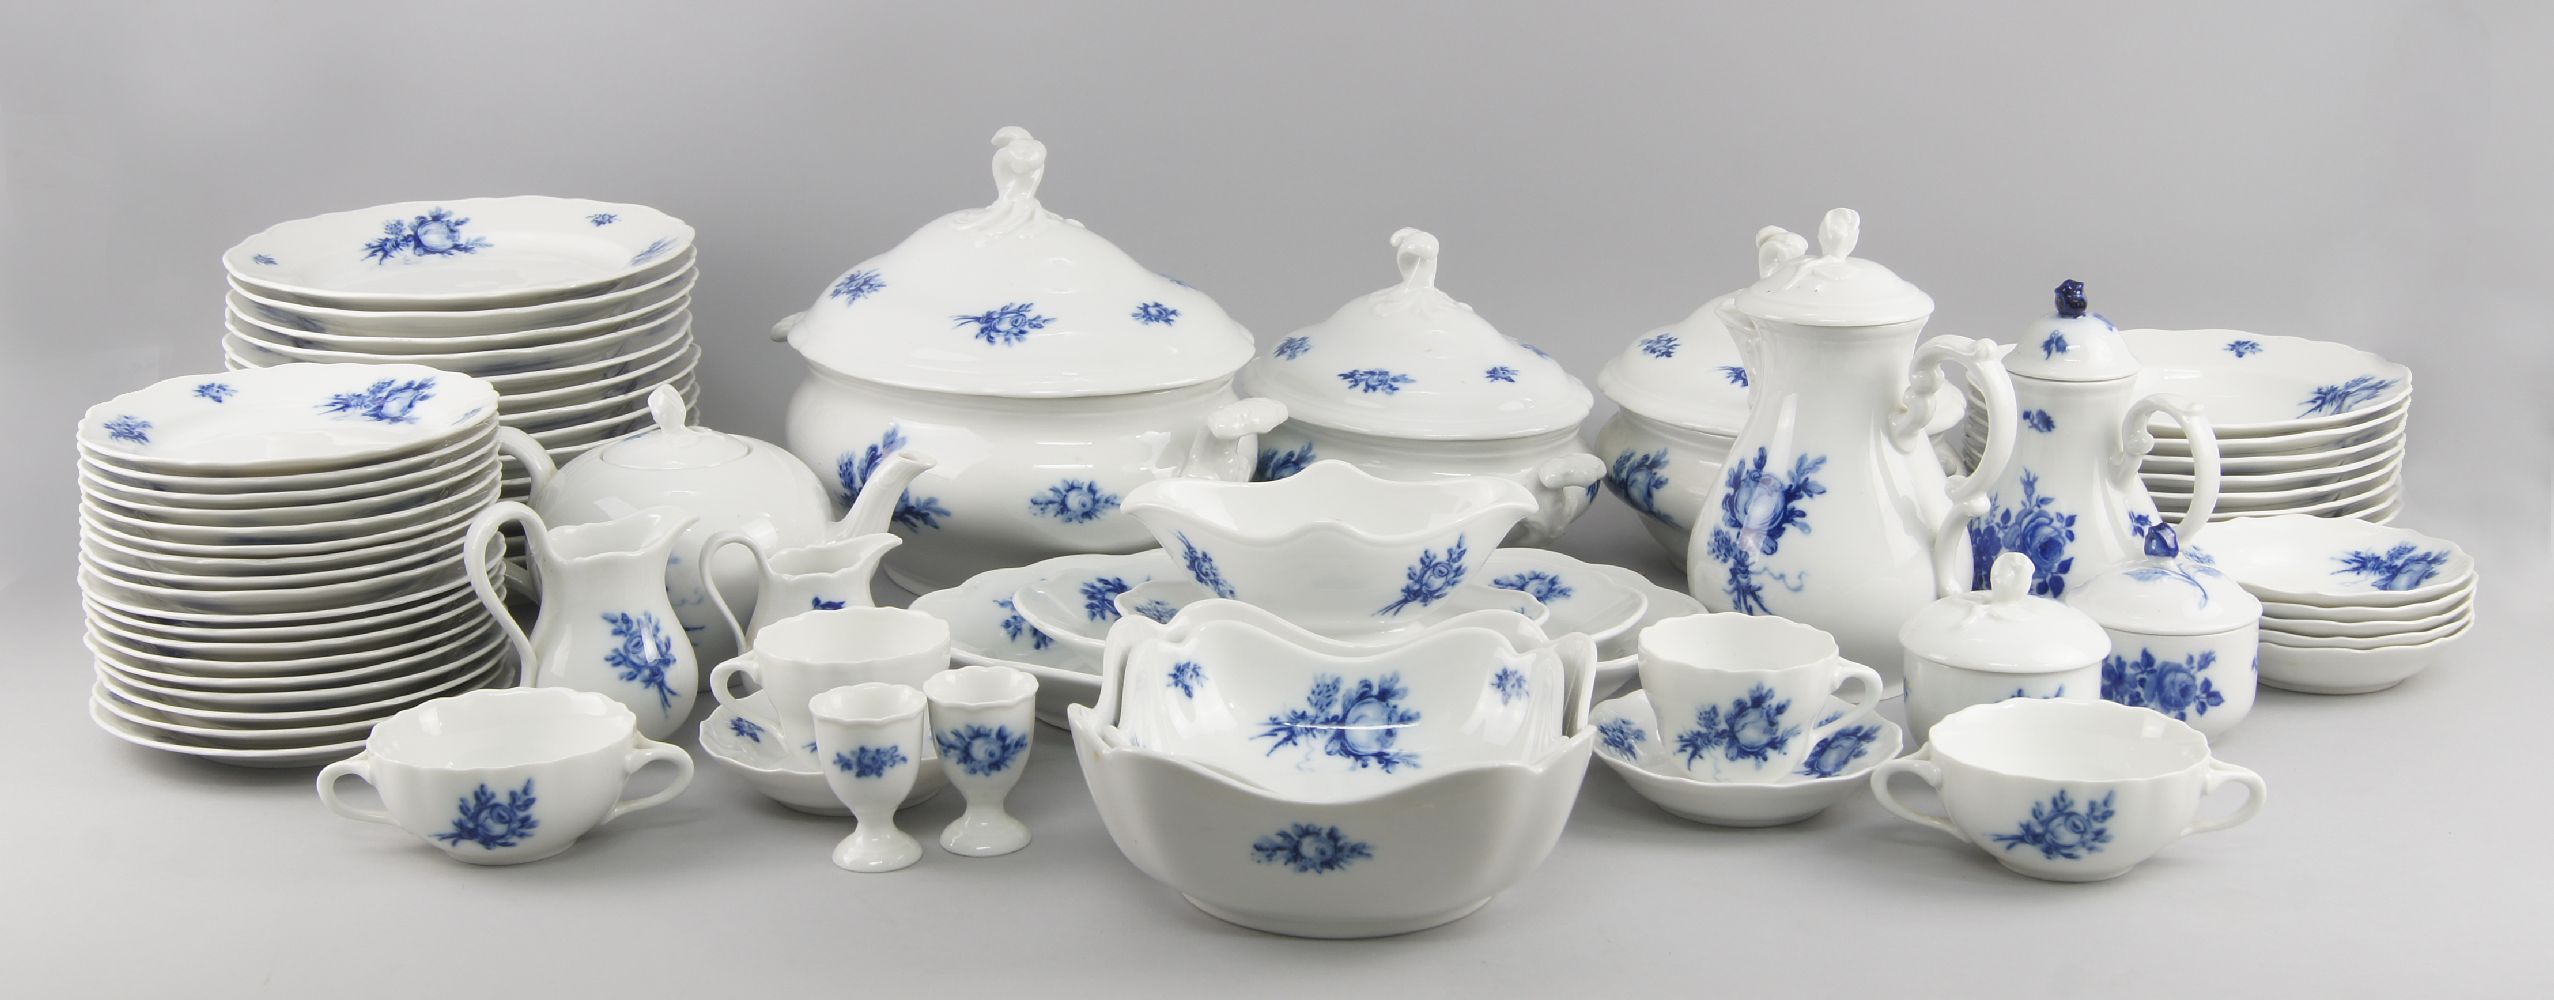 A German blue and white floral dinner and tea service by Hutschenreuther, with printed decoration,